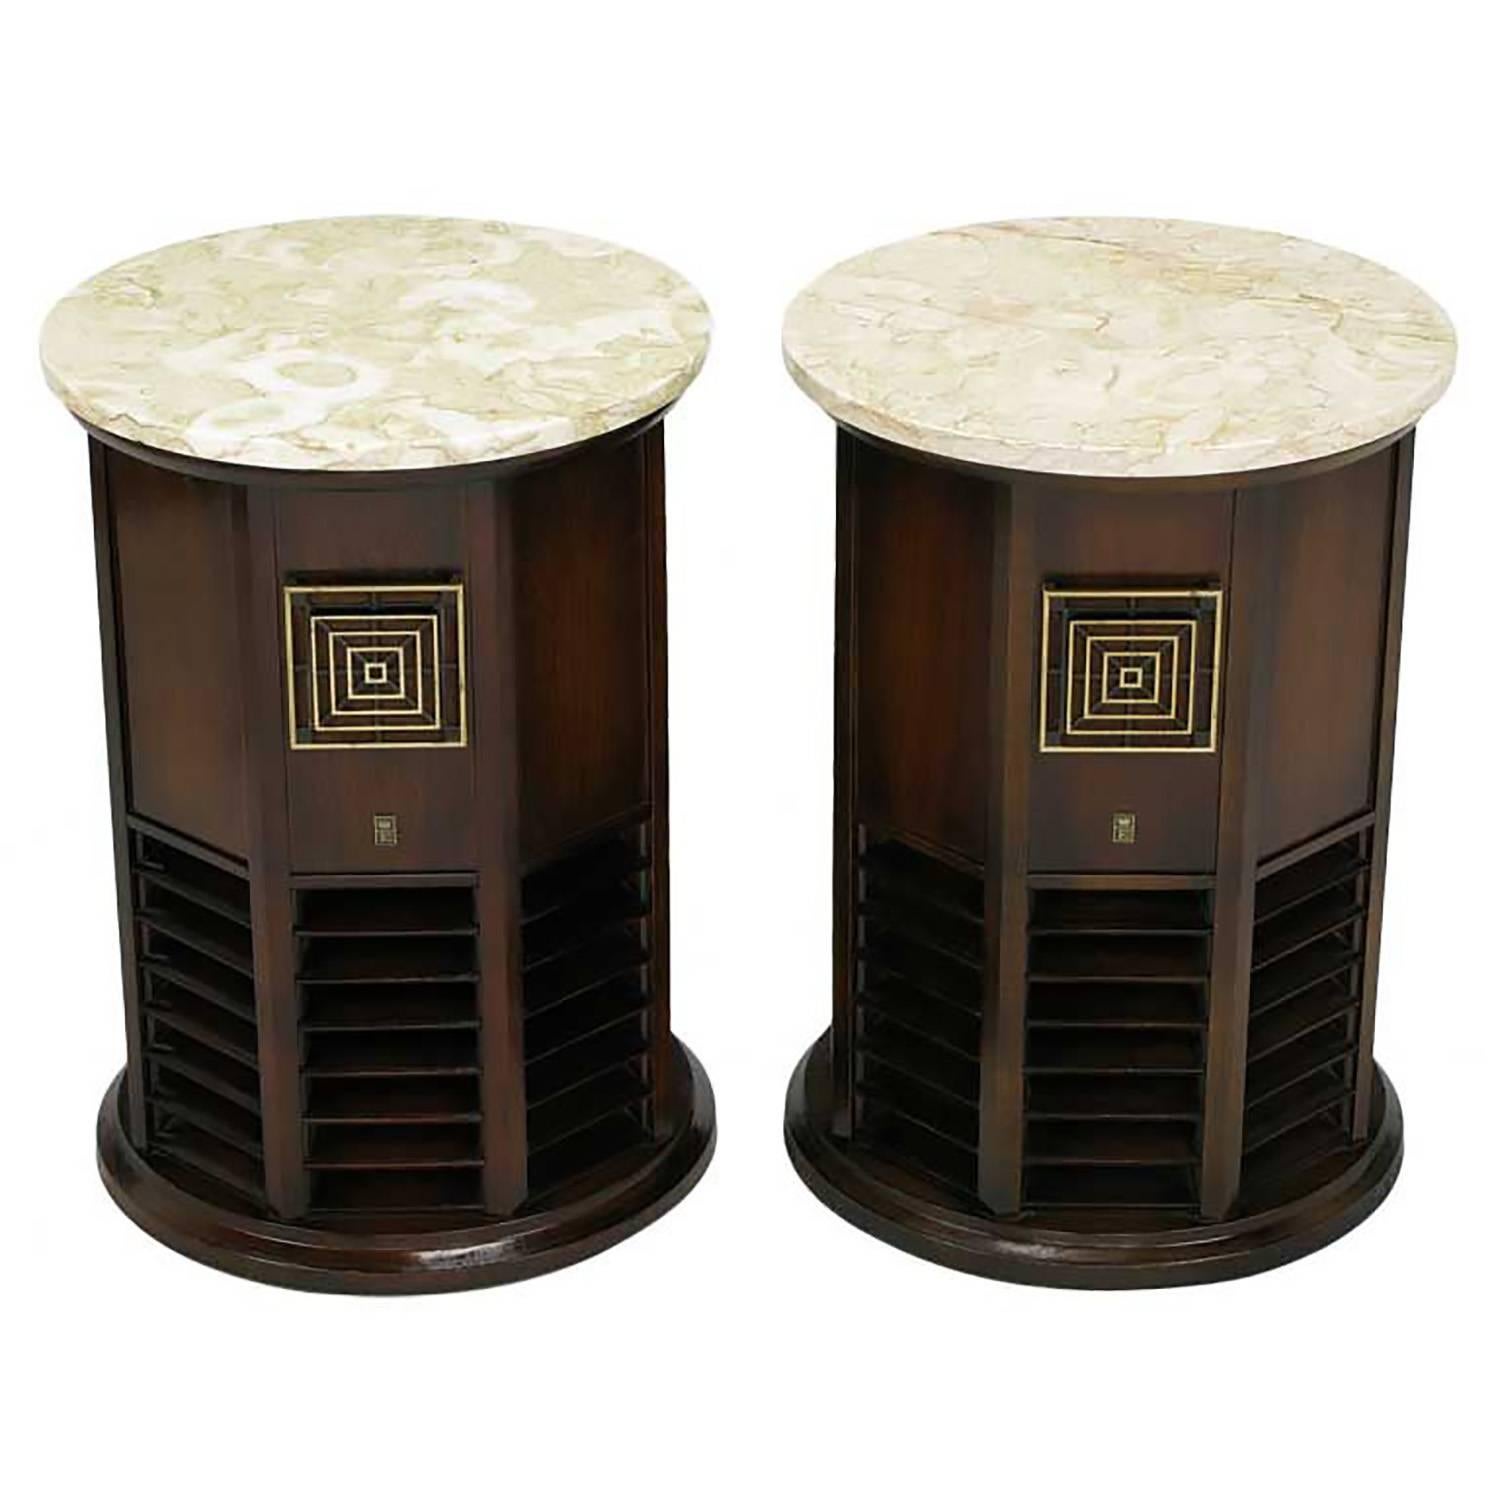 Pair of 1960s Walnut and Marble Columnar End Table Speakers